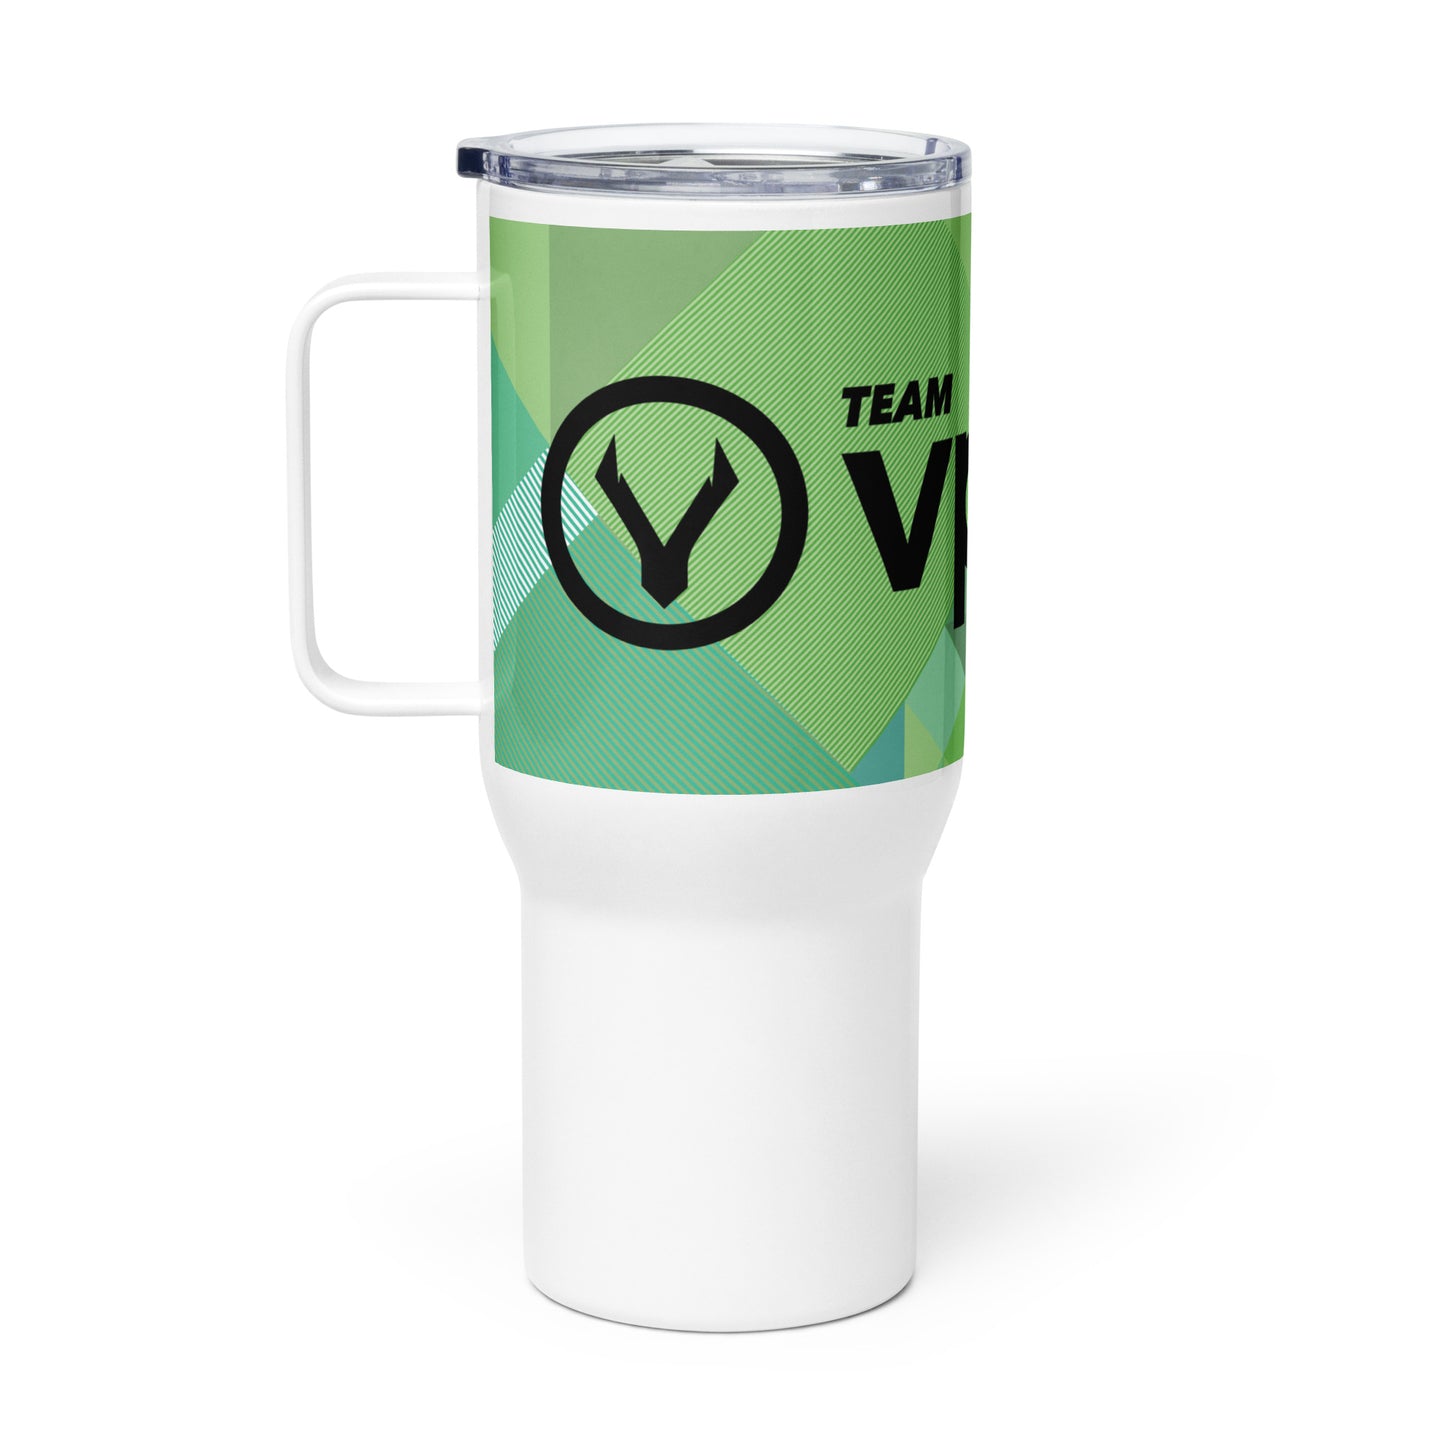 Load image into Gallery viewer, Team VPA Travel mug with a handle
